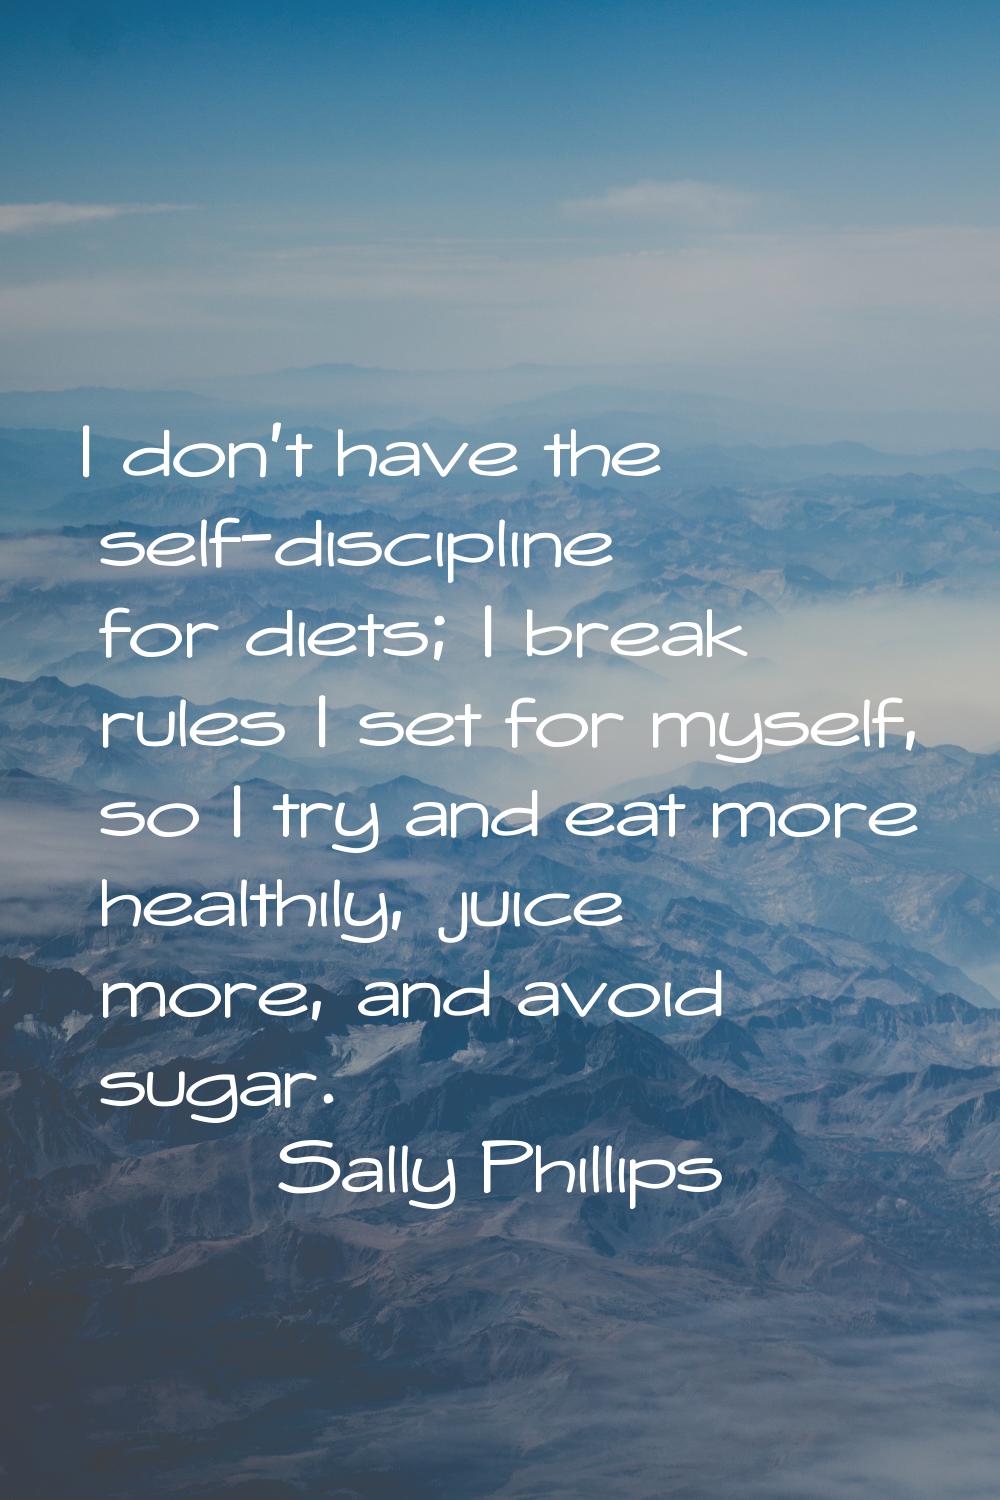 I don't have the self-discipline for diets; I break rules I set for myself, so I try and eat more h